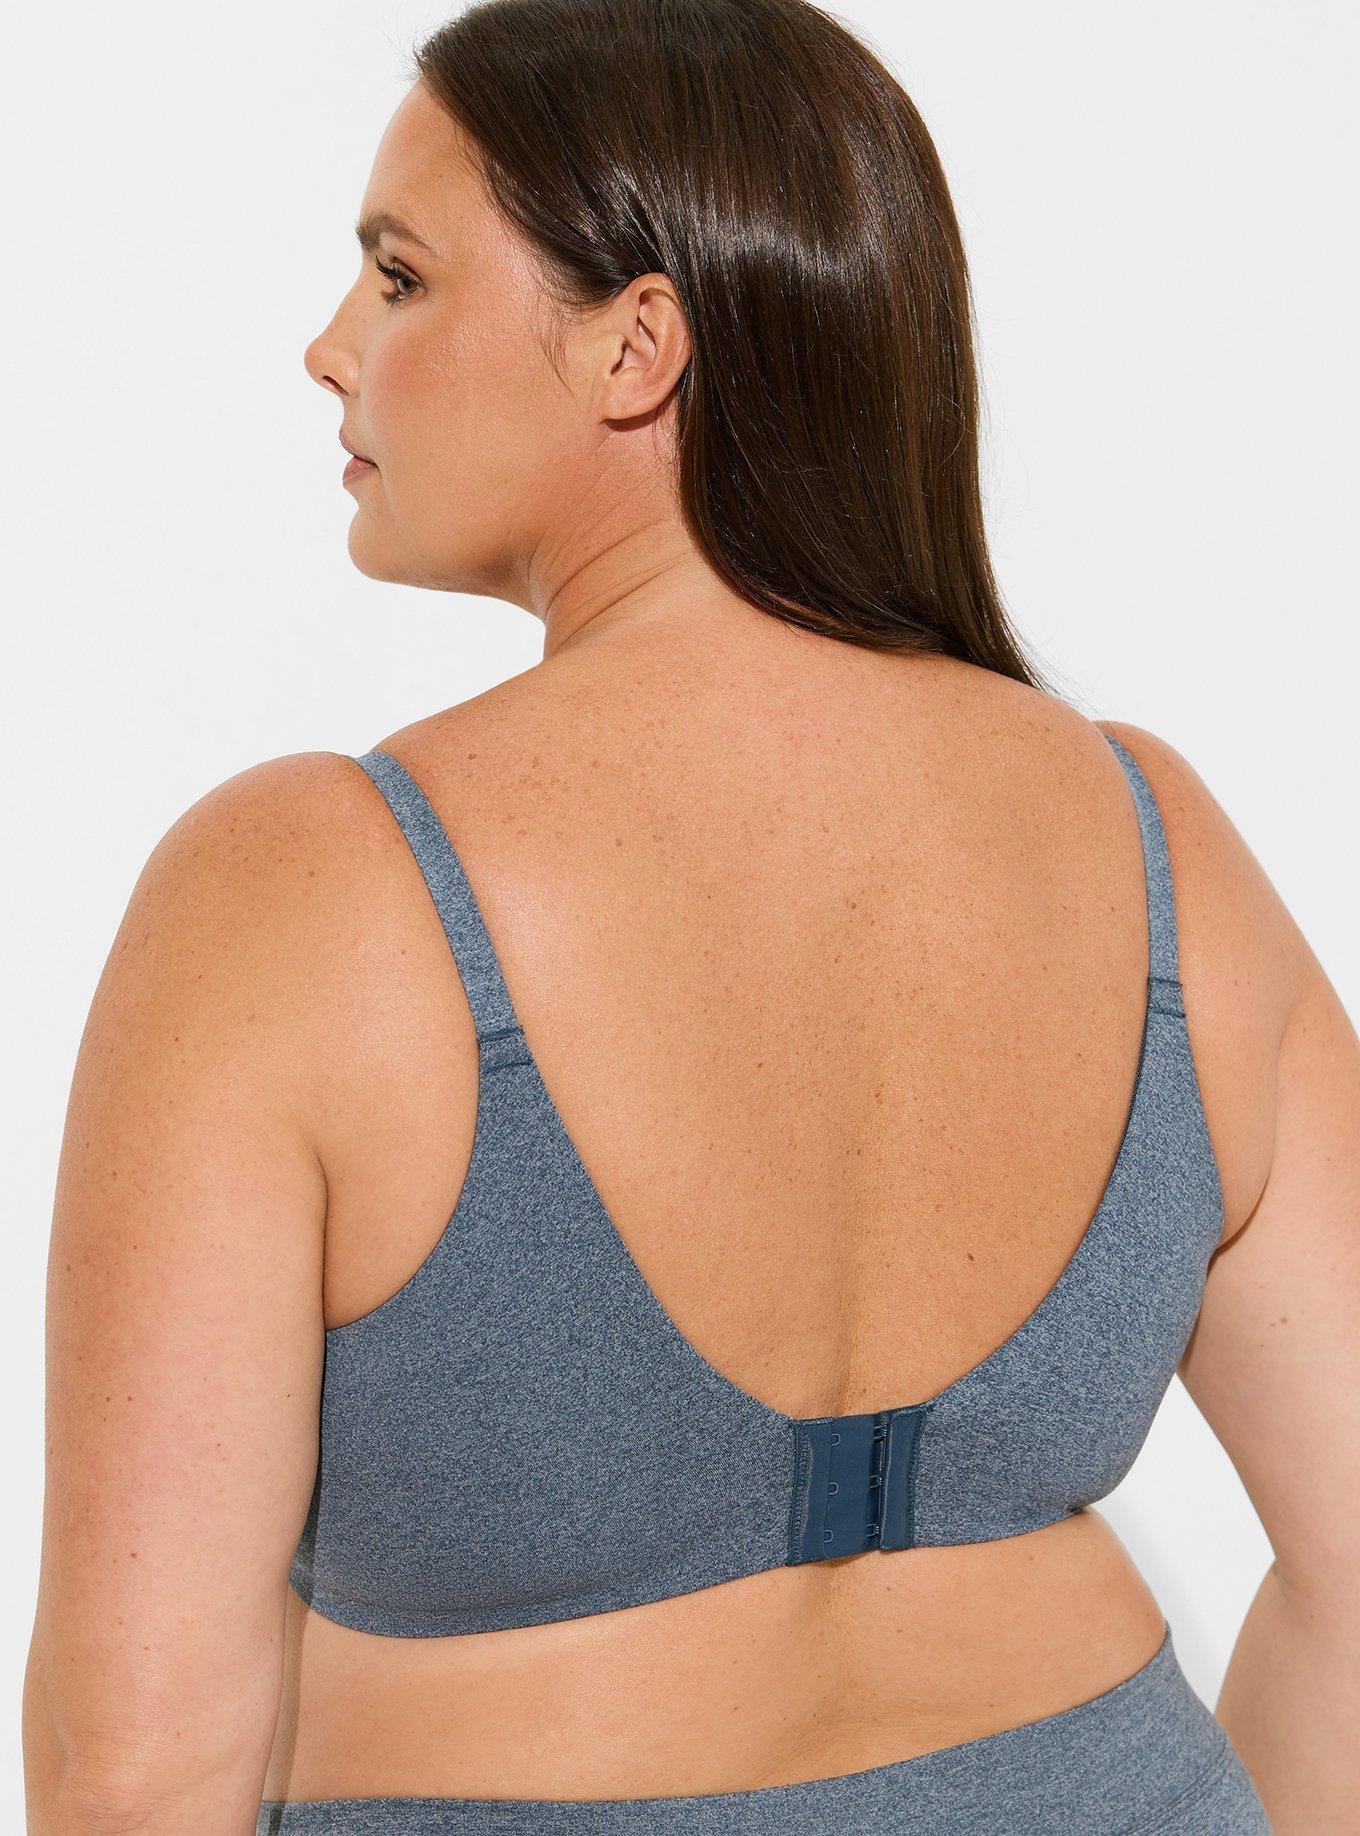 Torrid - Our 360° Back Smoothing Bra is perfection! Select